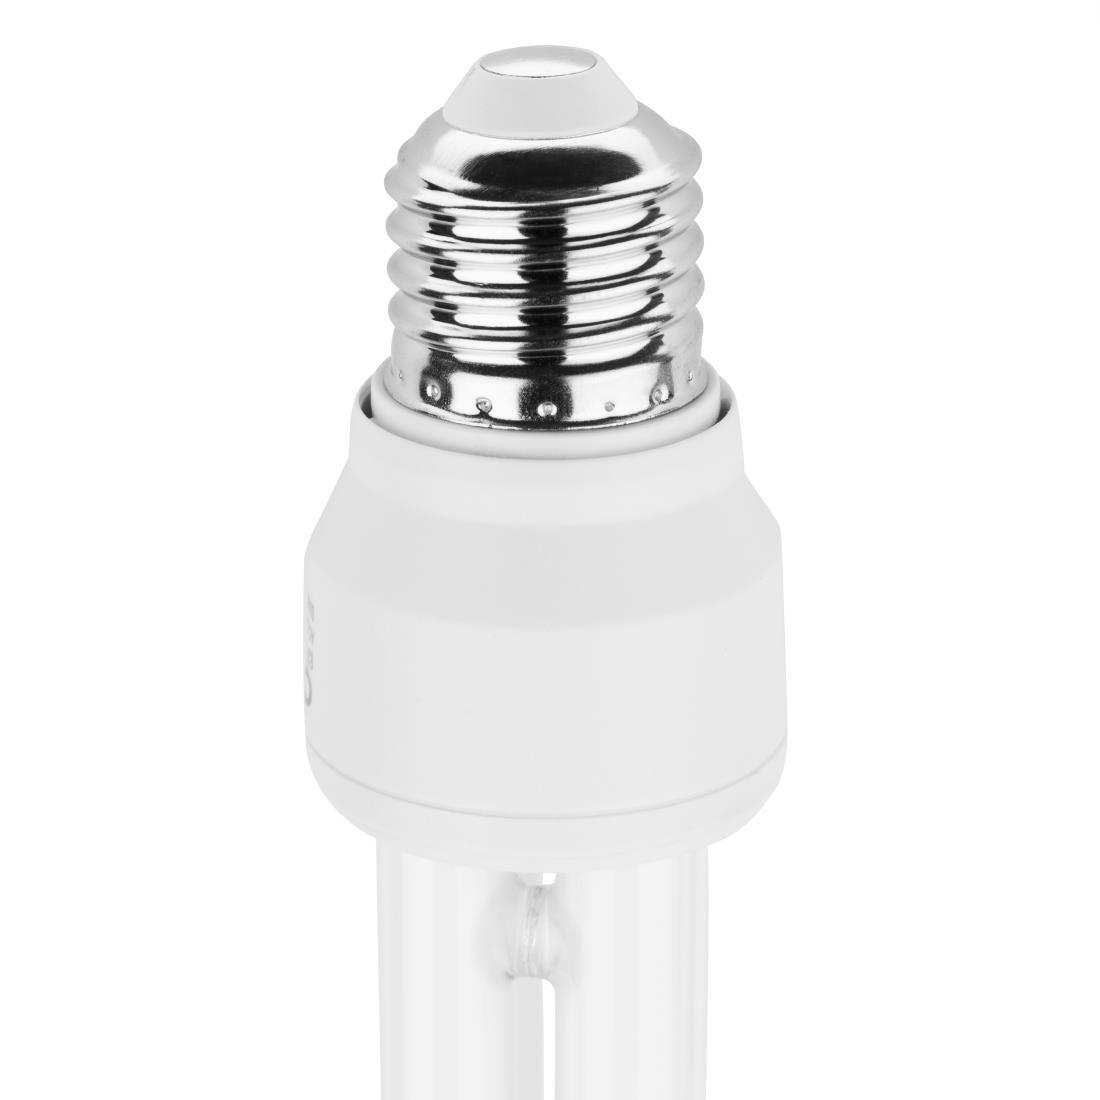 Eazyzap Replacement Fly Killer Bulb - AE978  - 4